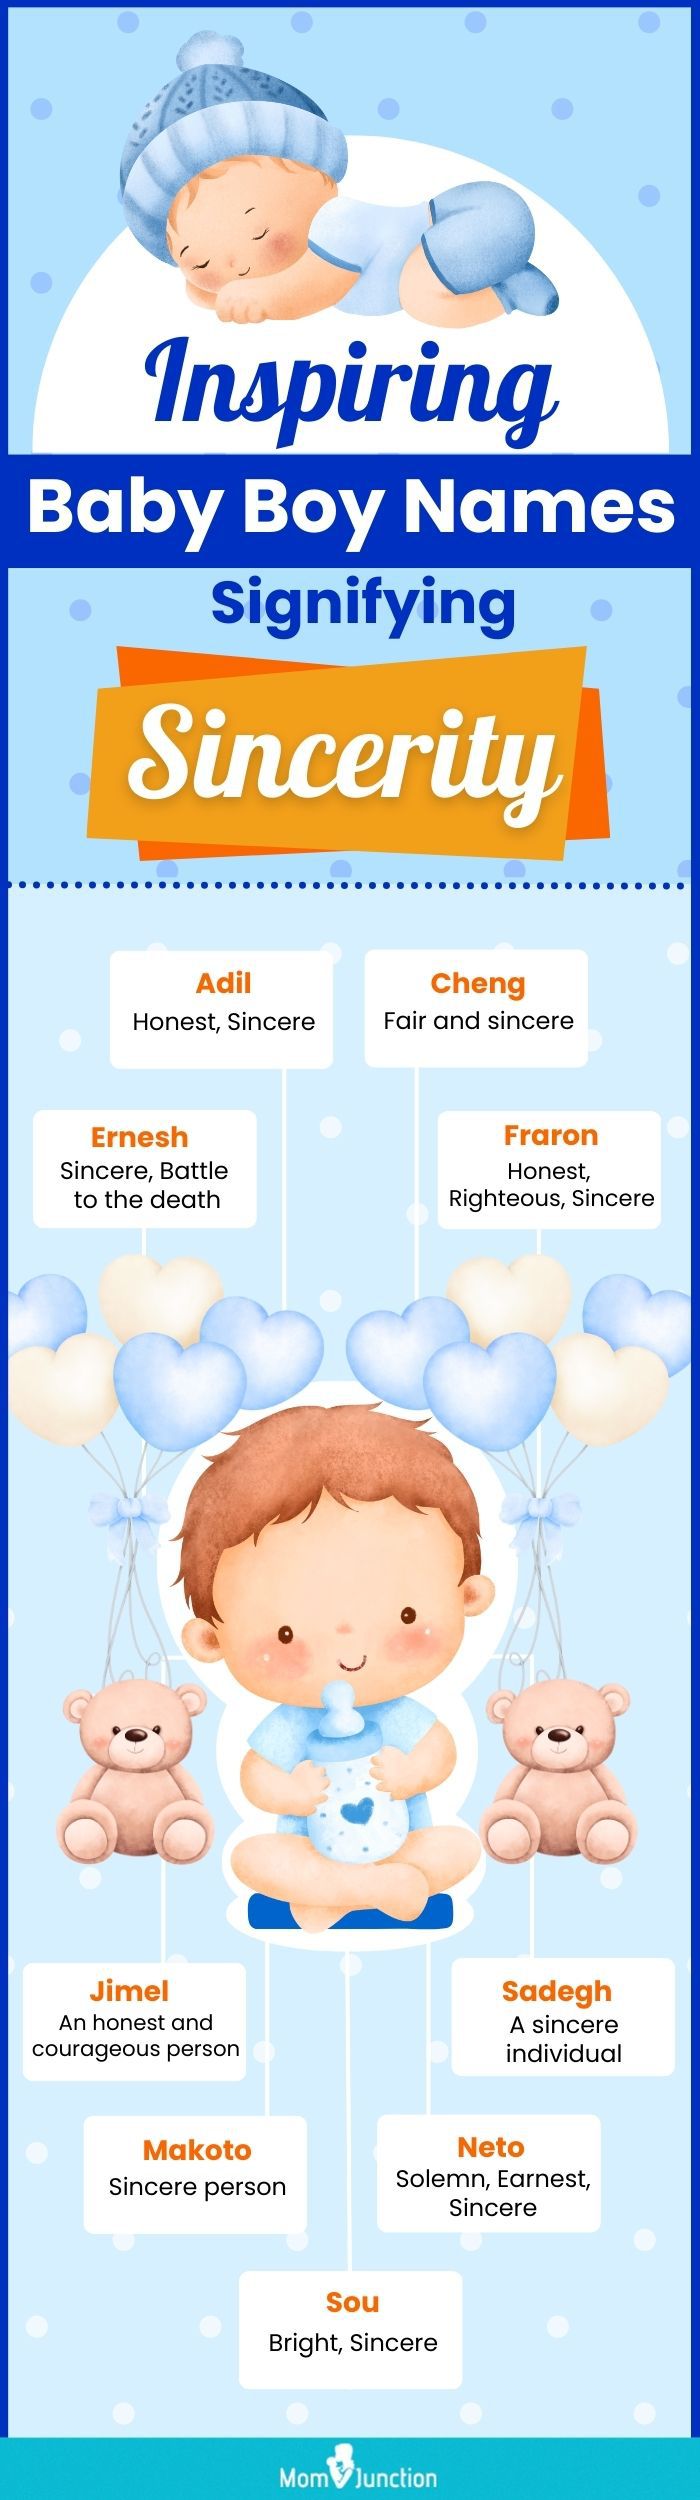 inspiring baby boy names signifying sincerity (infographic)